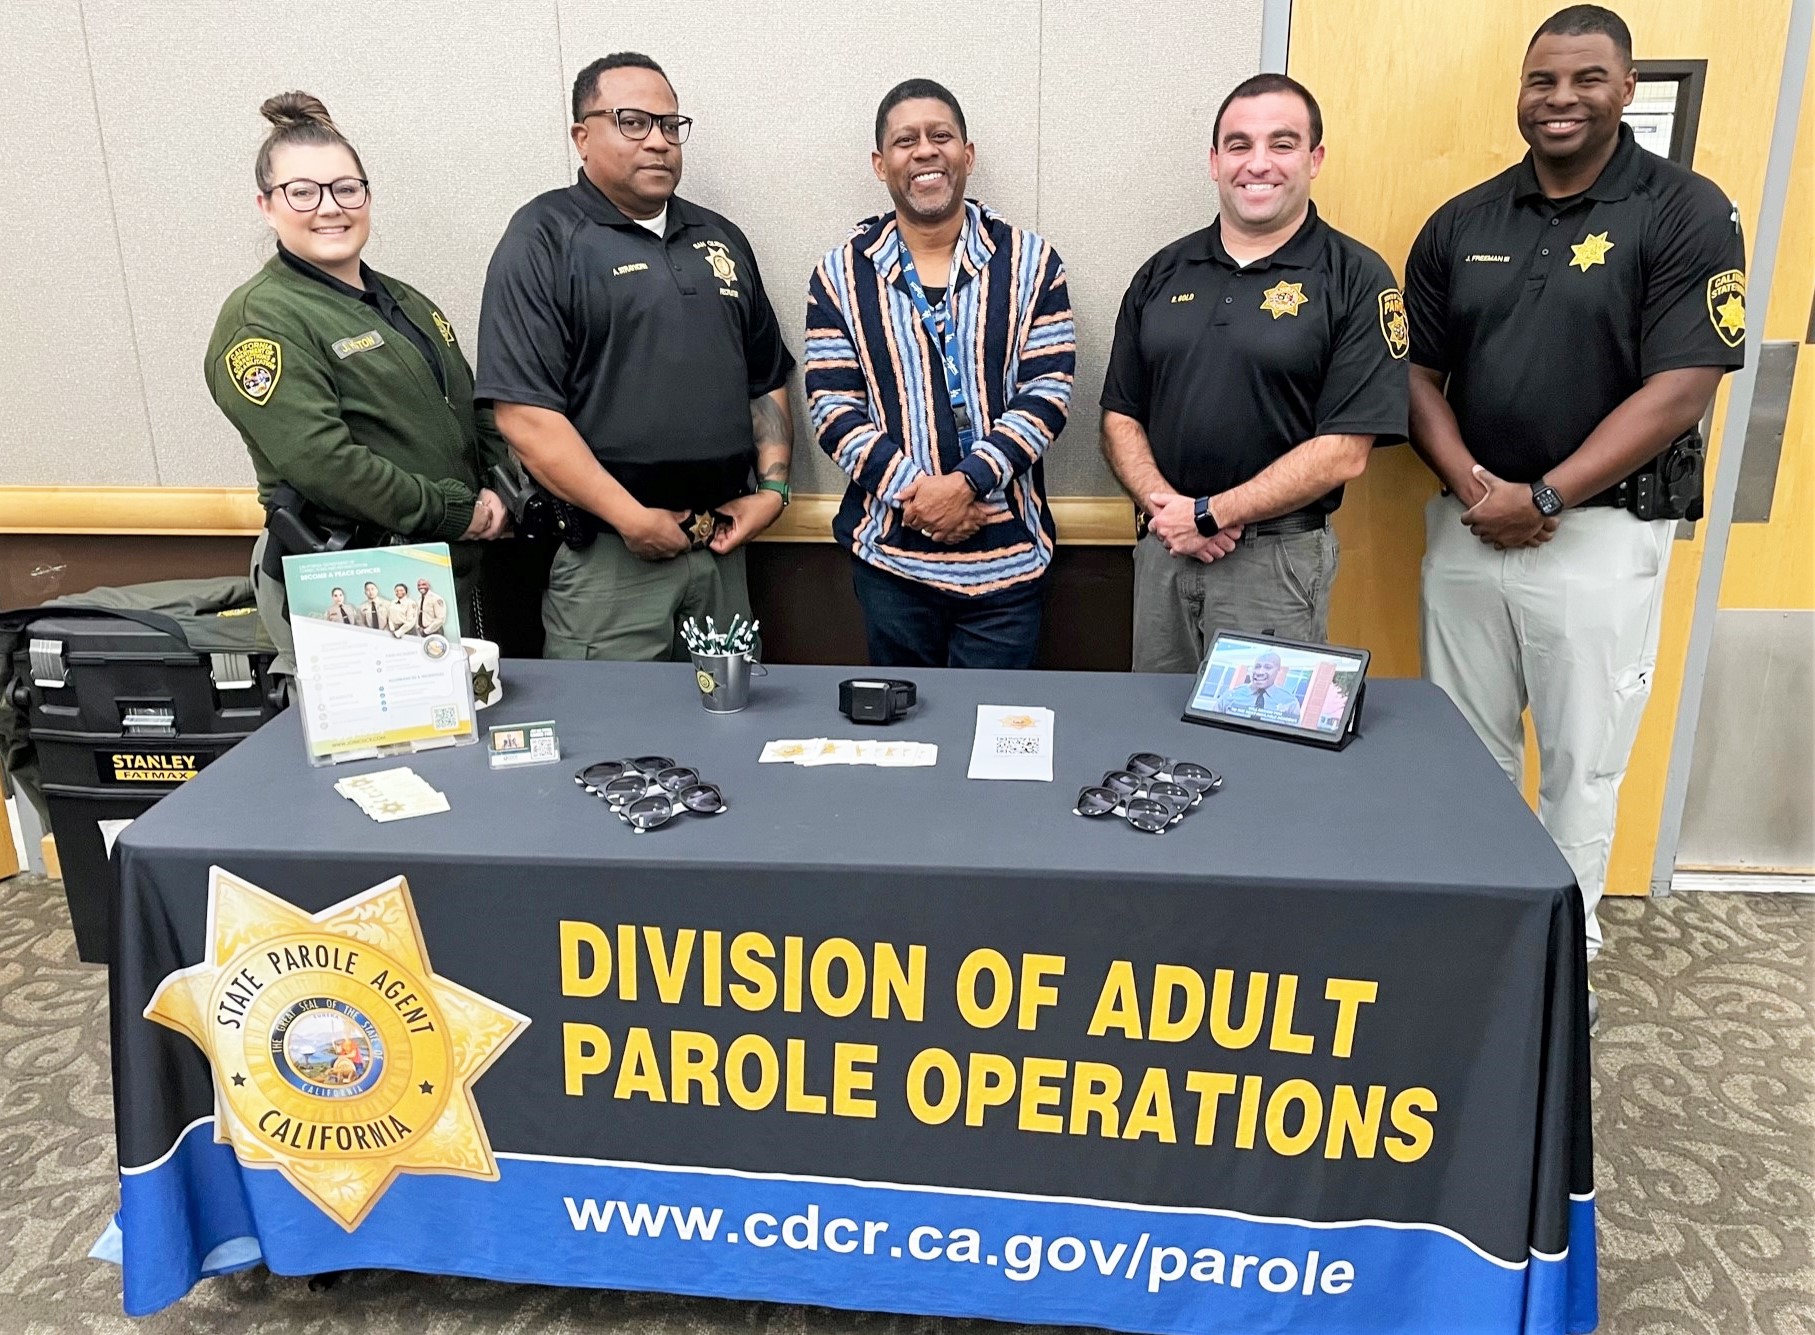 CDCR and parole recruiters at an information booth for a youth academy.